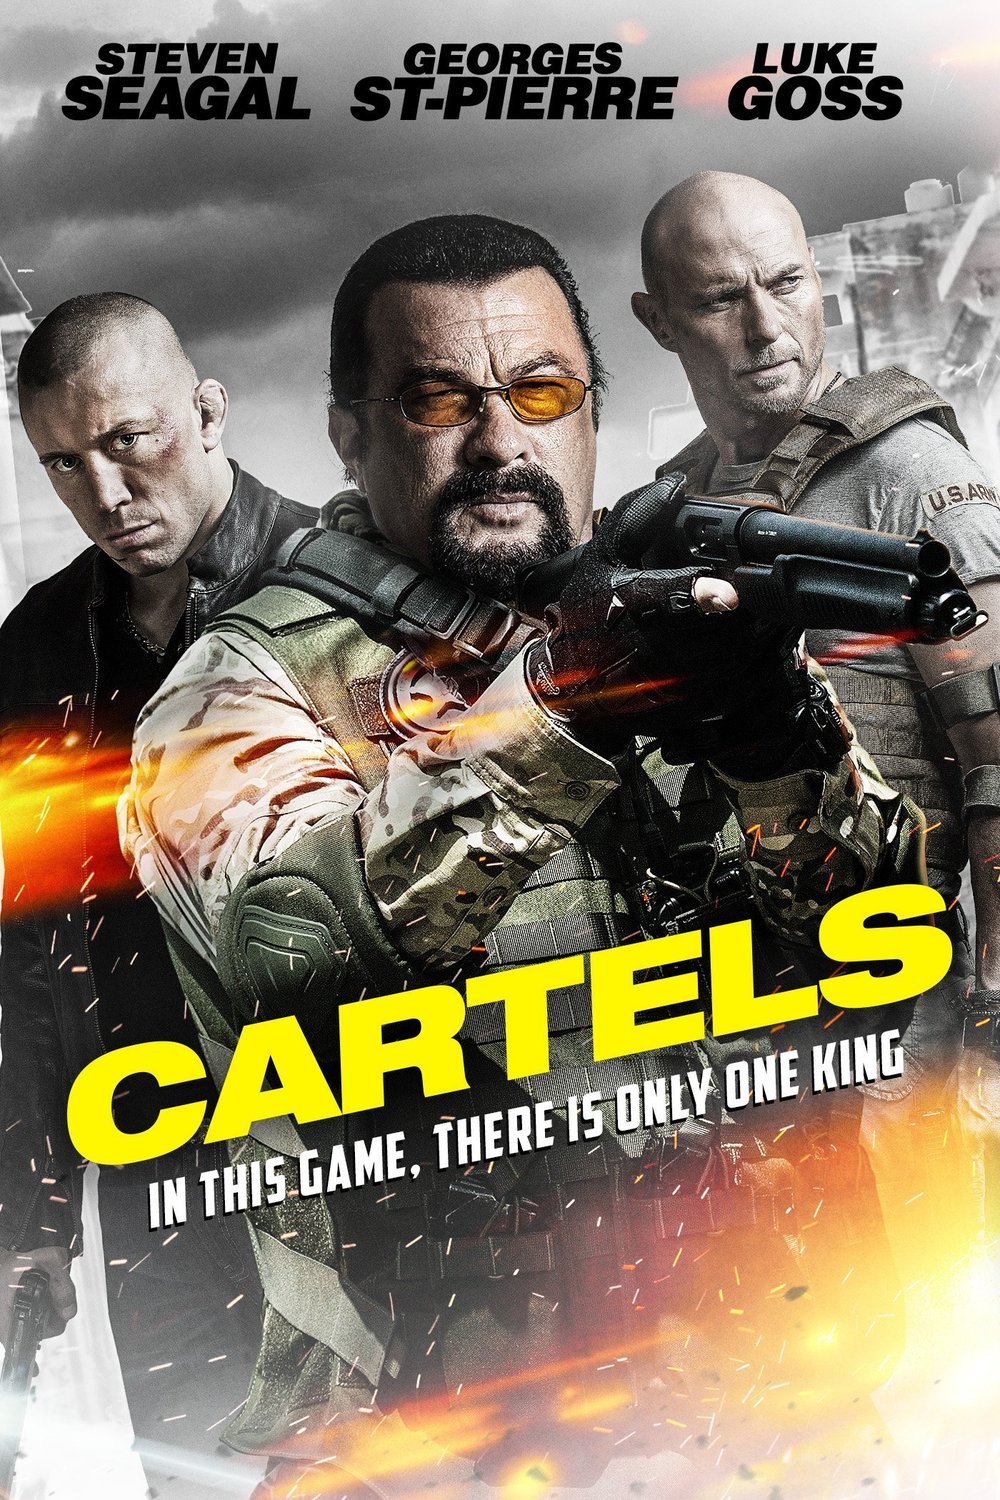 Poster of the movie Cartels